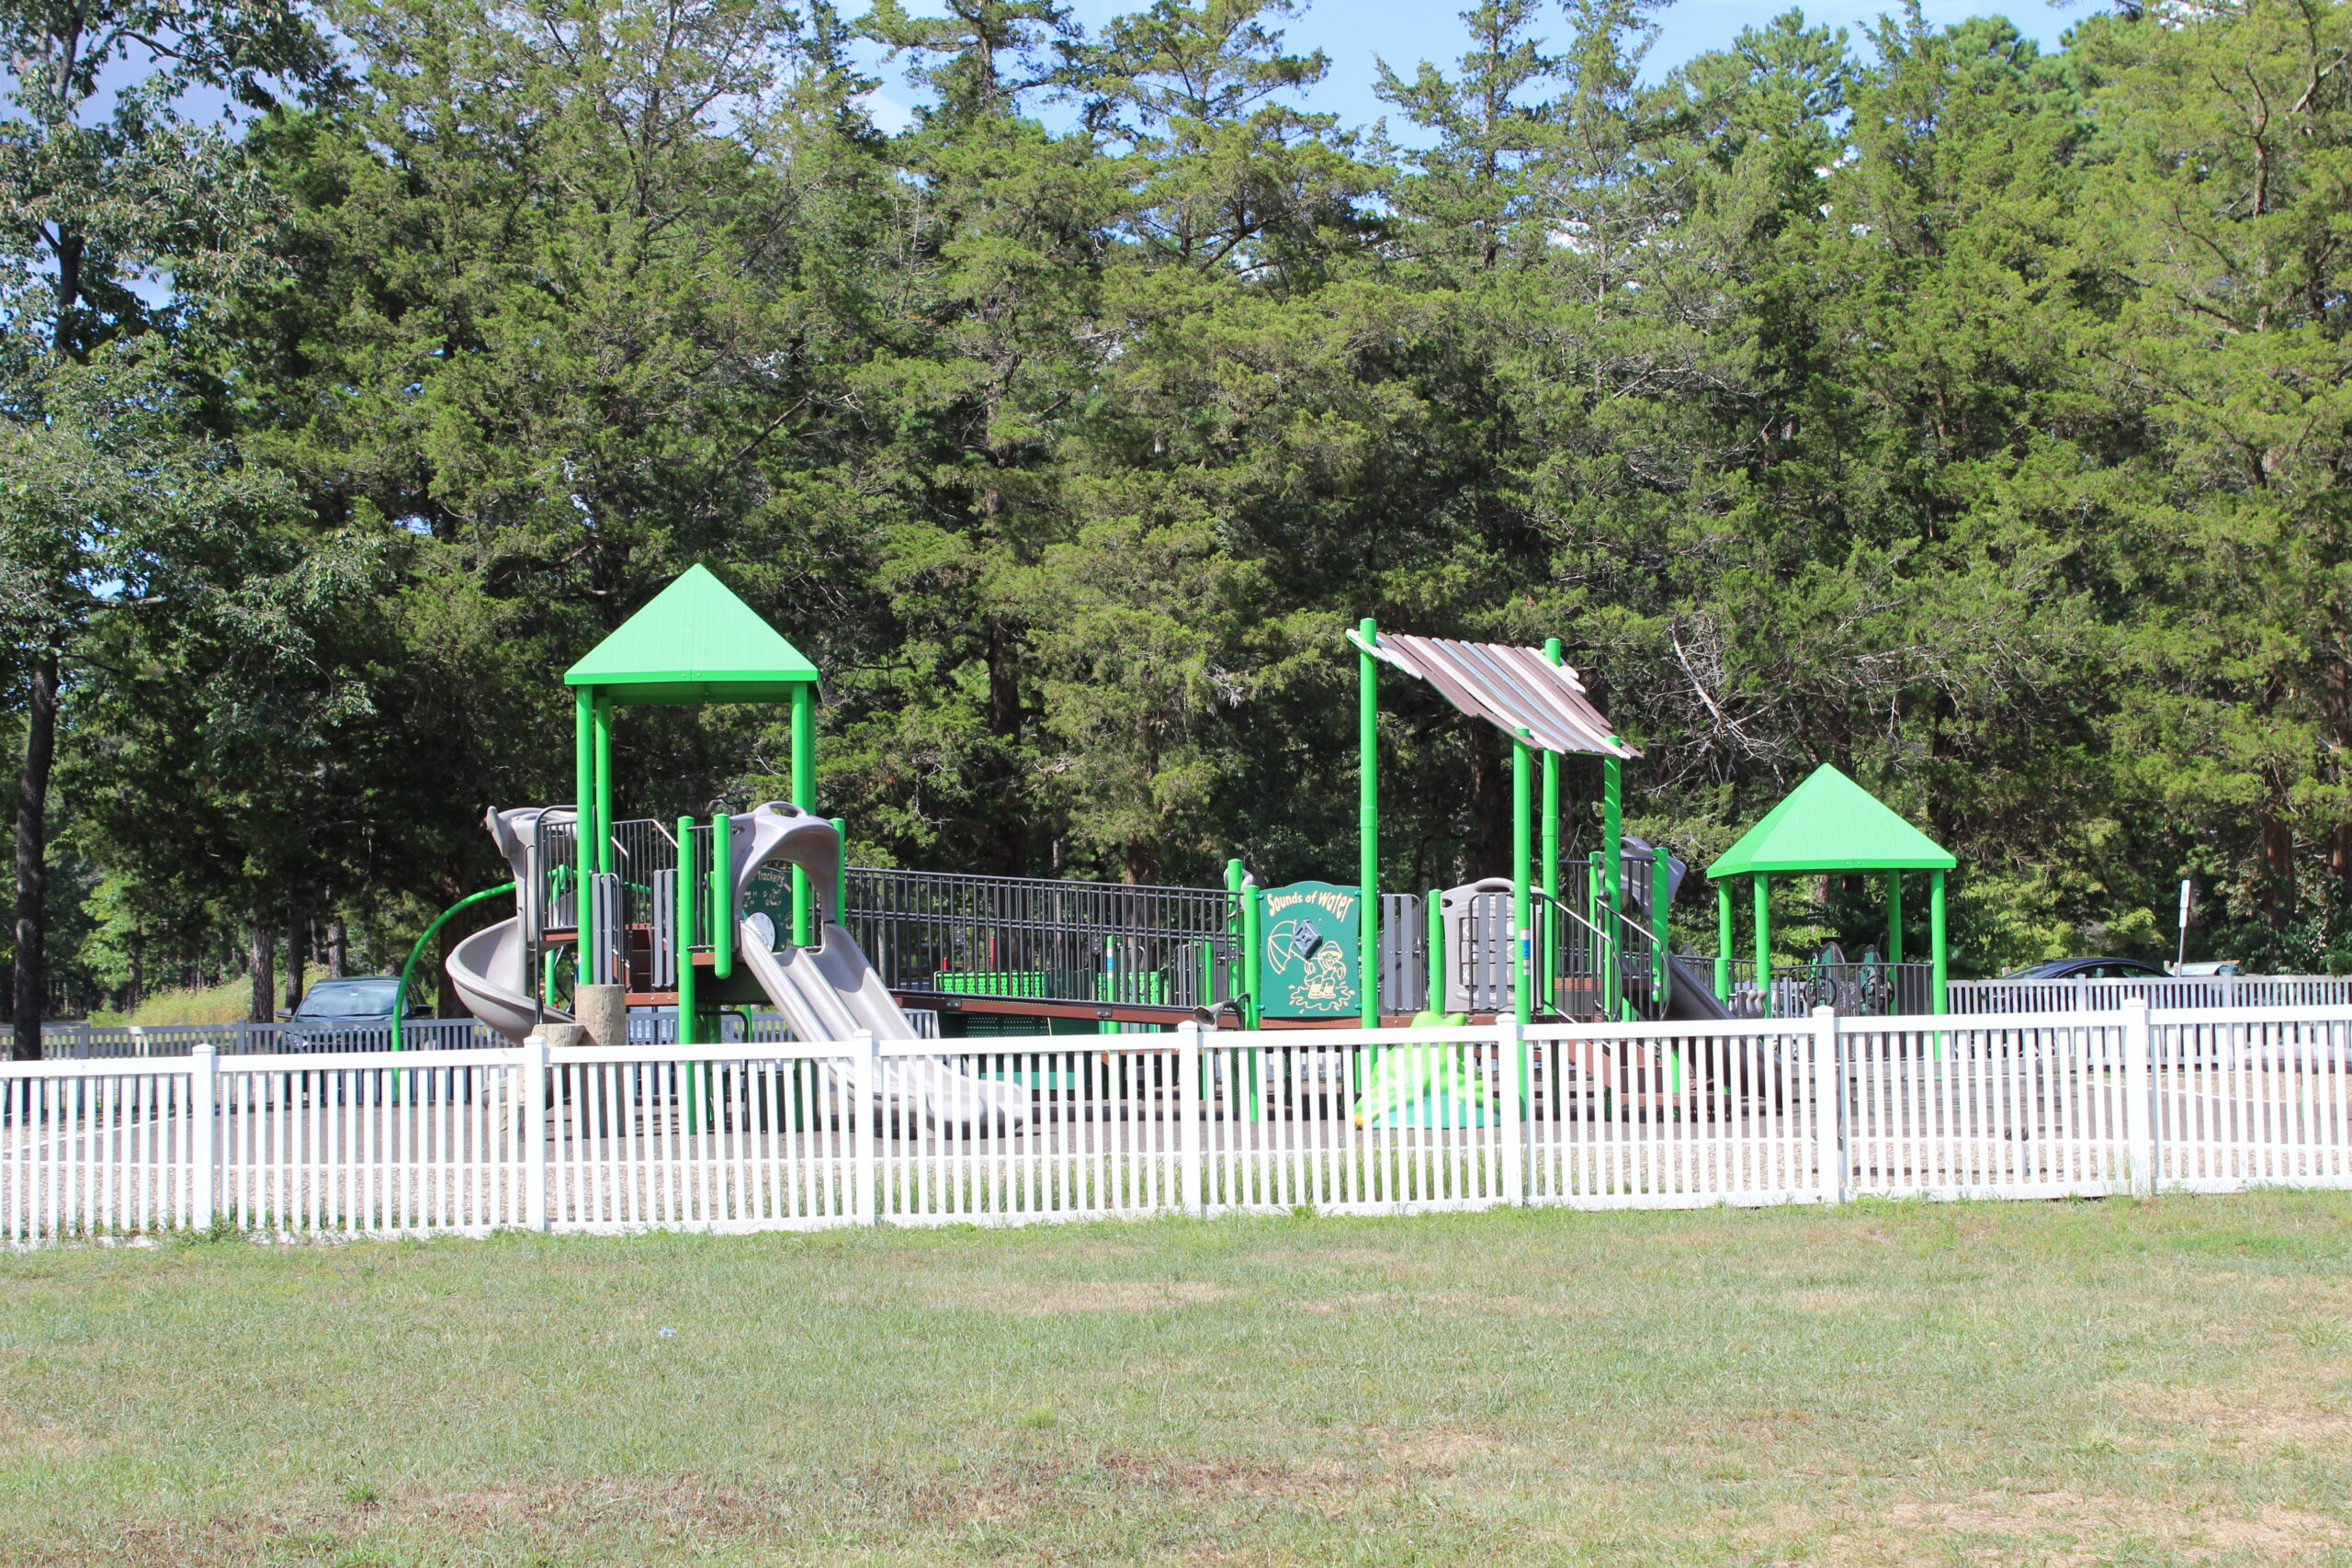 Front Estell Manor Park Playgrounds in Mays Landing NJ - WIDE image - NEW accessible playground with awnings for shade